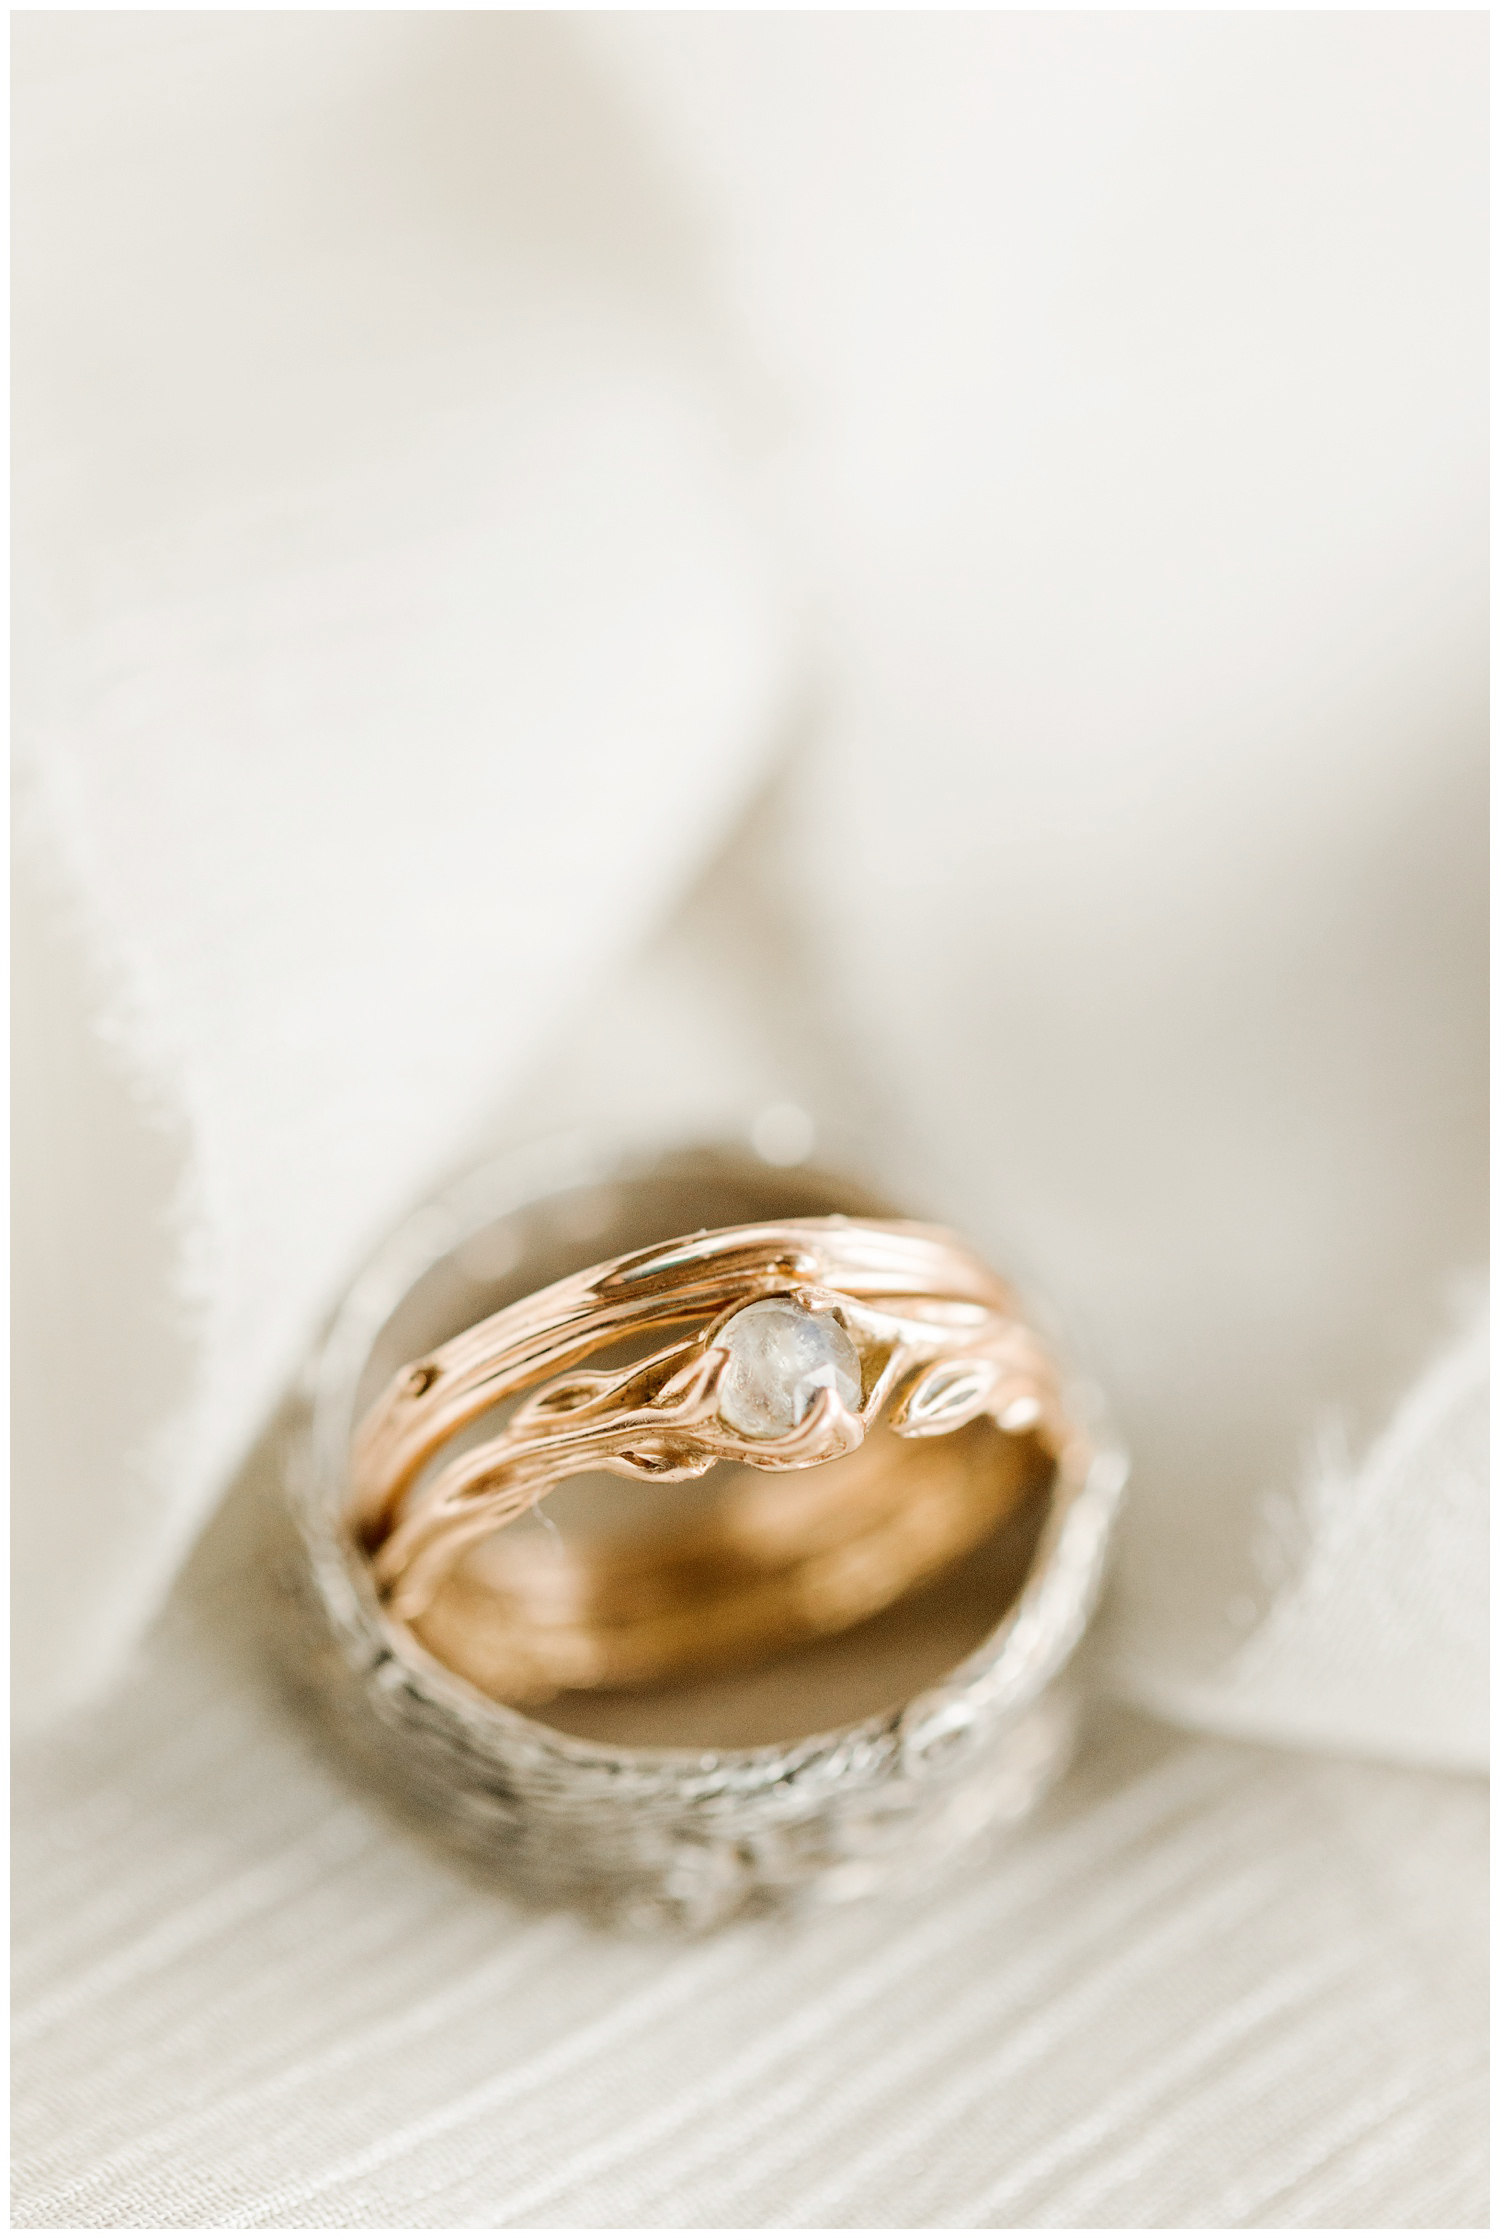 Hippie unity wedding band featuring a rose gold twig and leaf band and a center moonstone | CB Studio